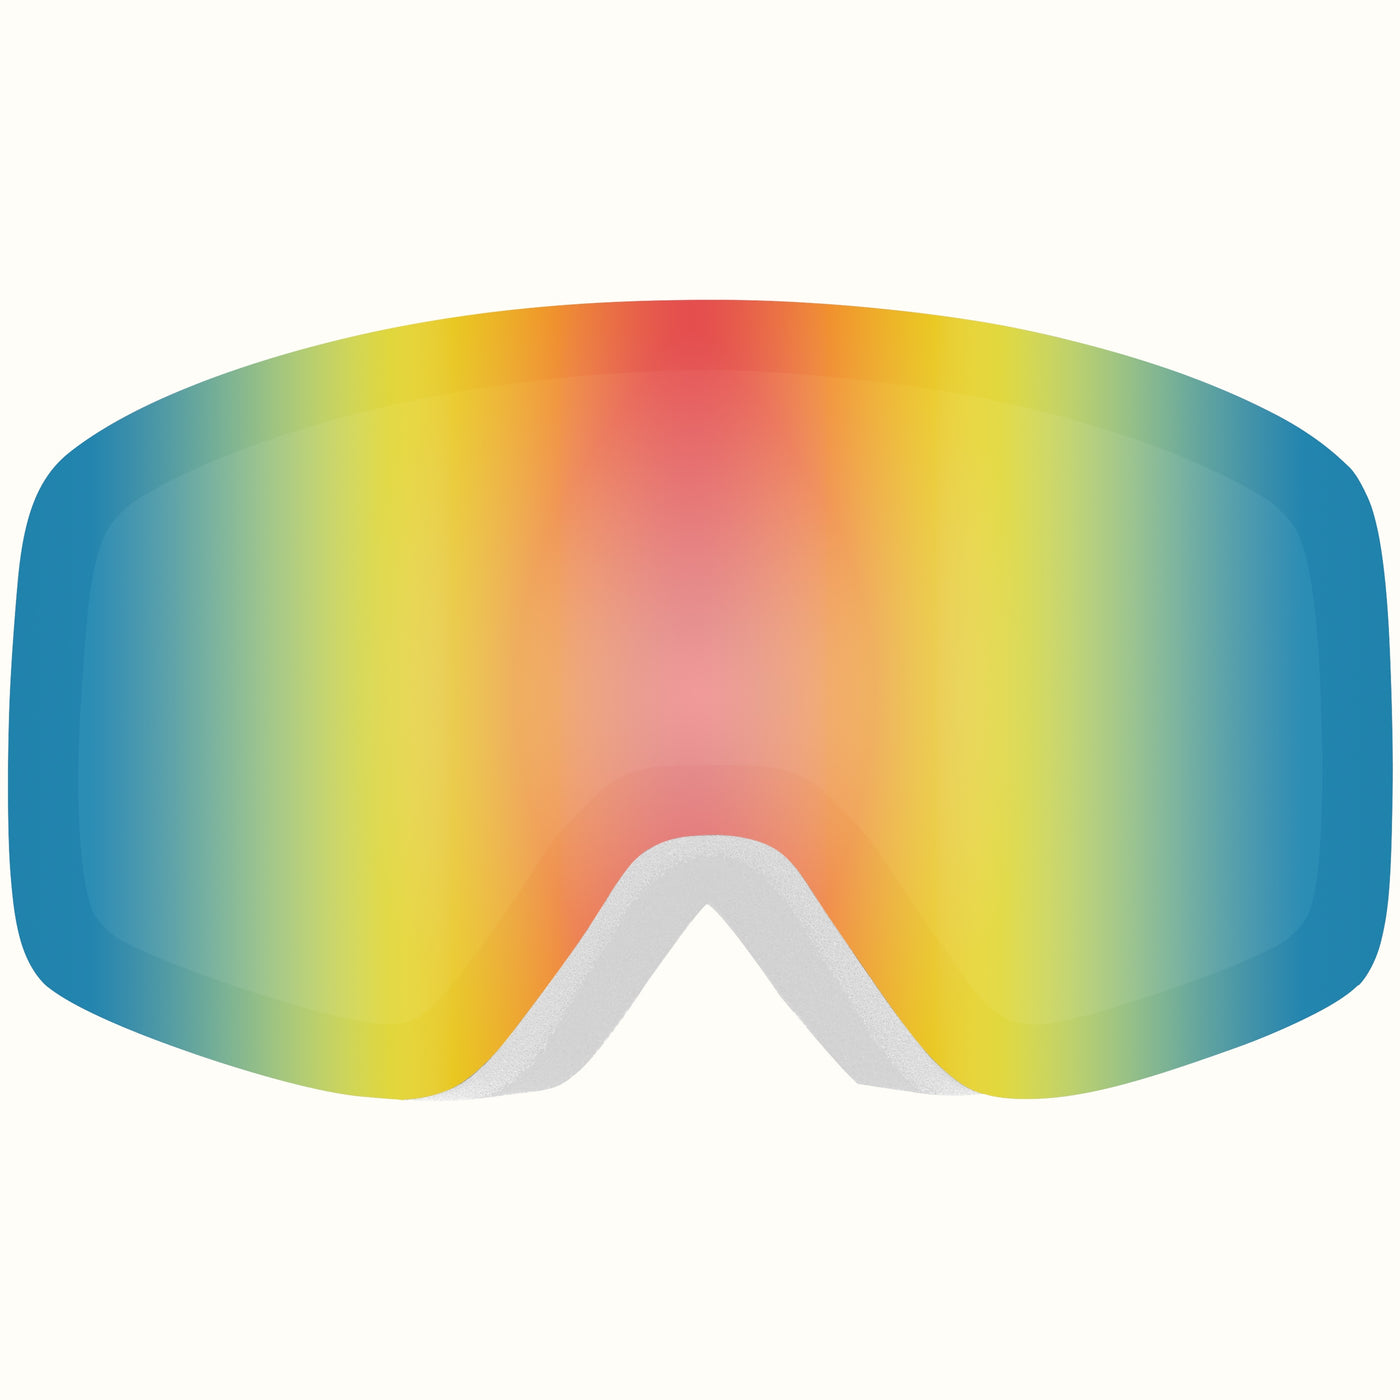 Flume Goggles Snap-in Lens | Kaleido